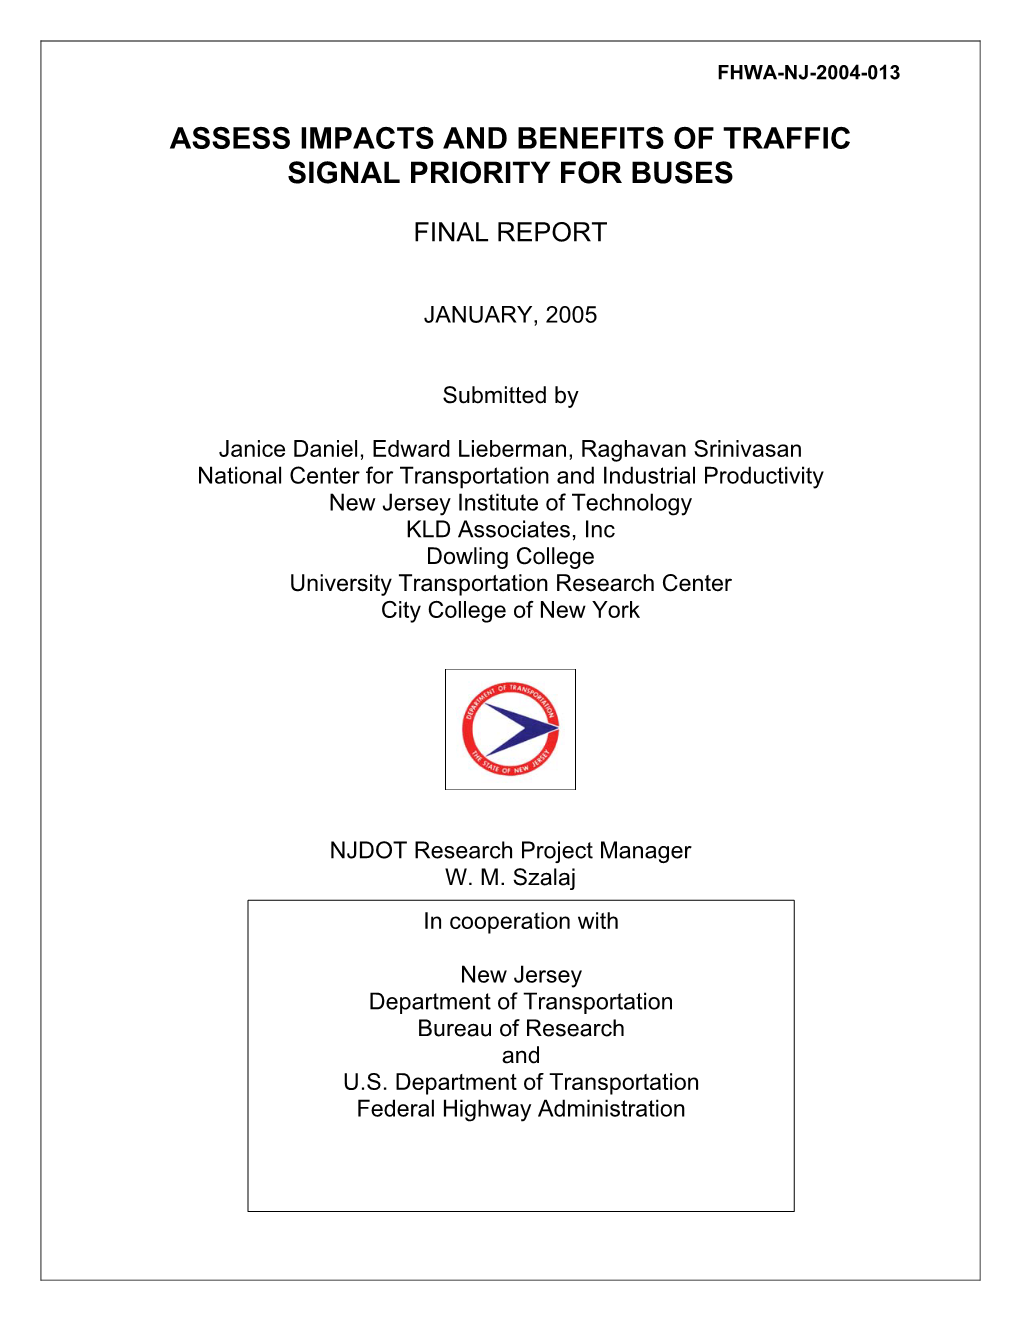 Assess Impacts and Benefits of Traffic Signal Priority for Buses